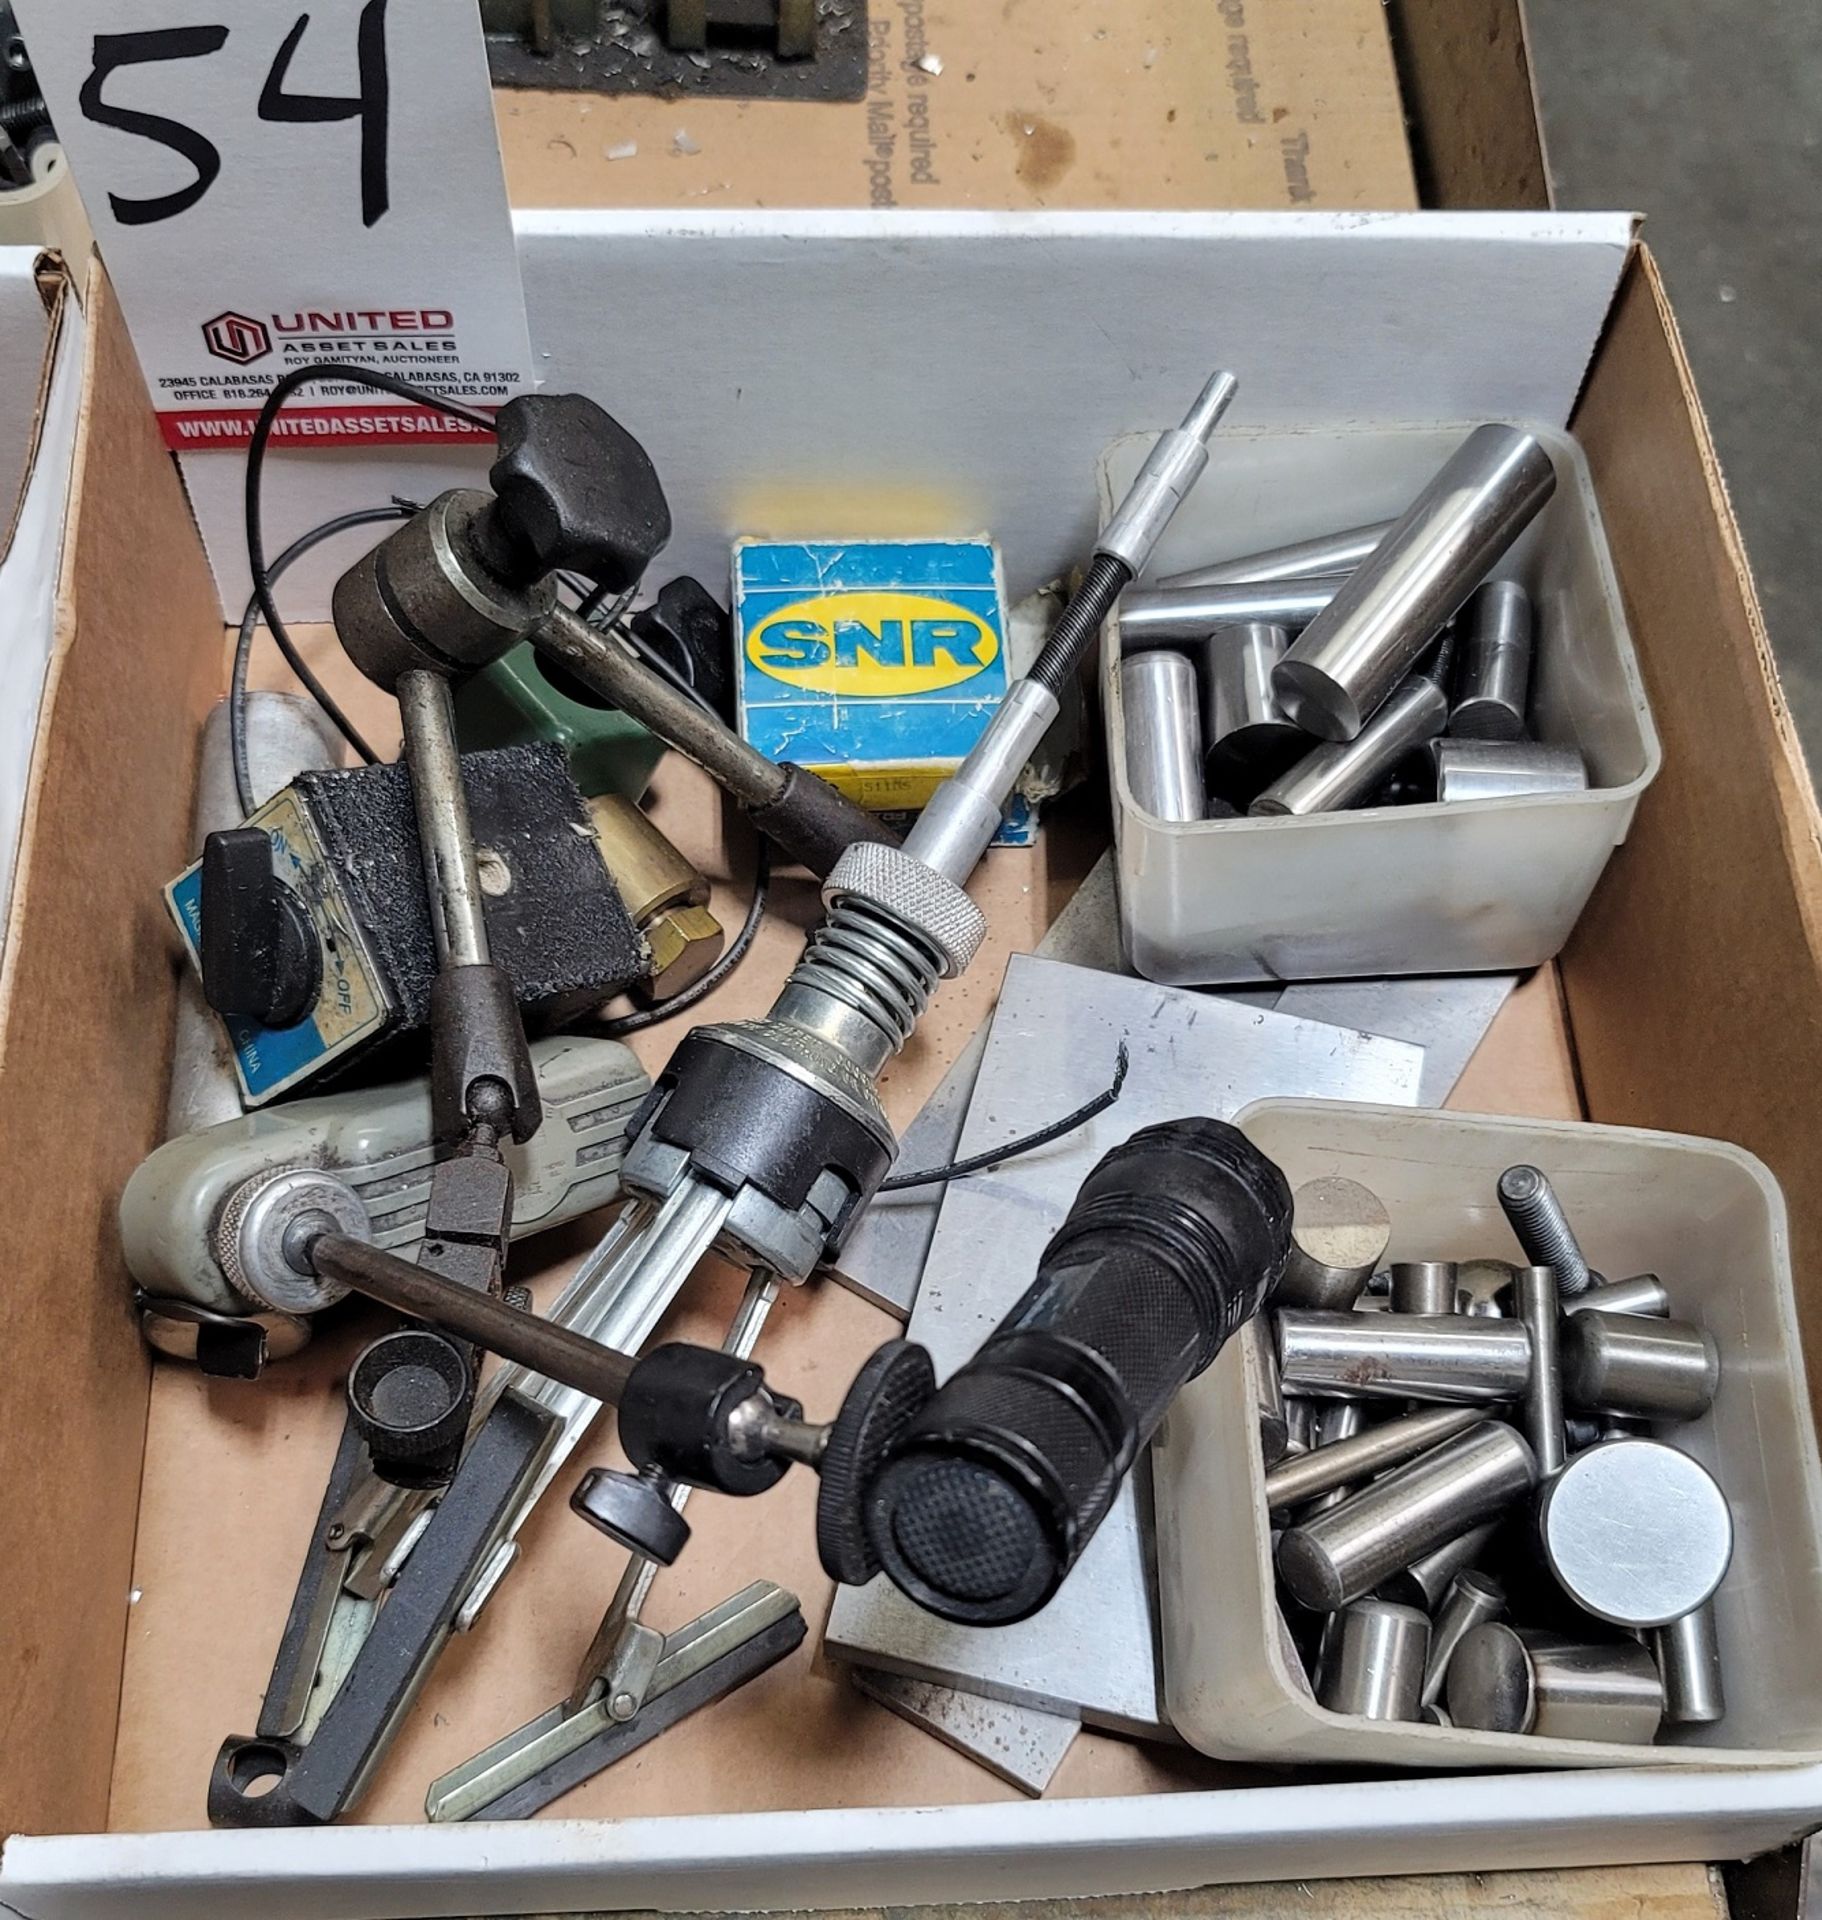 LOT - MISC SHOP ITEMS: CYLINDER HONE, (2) INDICATOR STANDS, (2) BEARINGS, ETC.